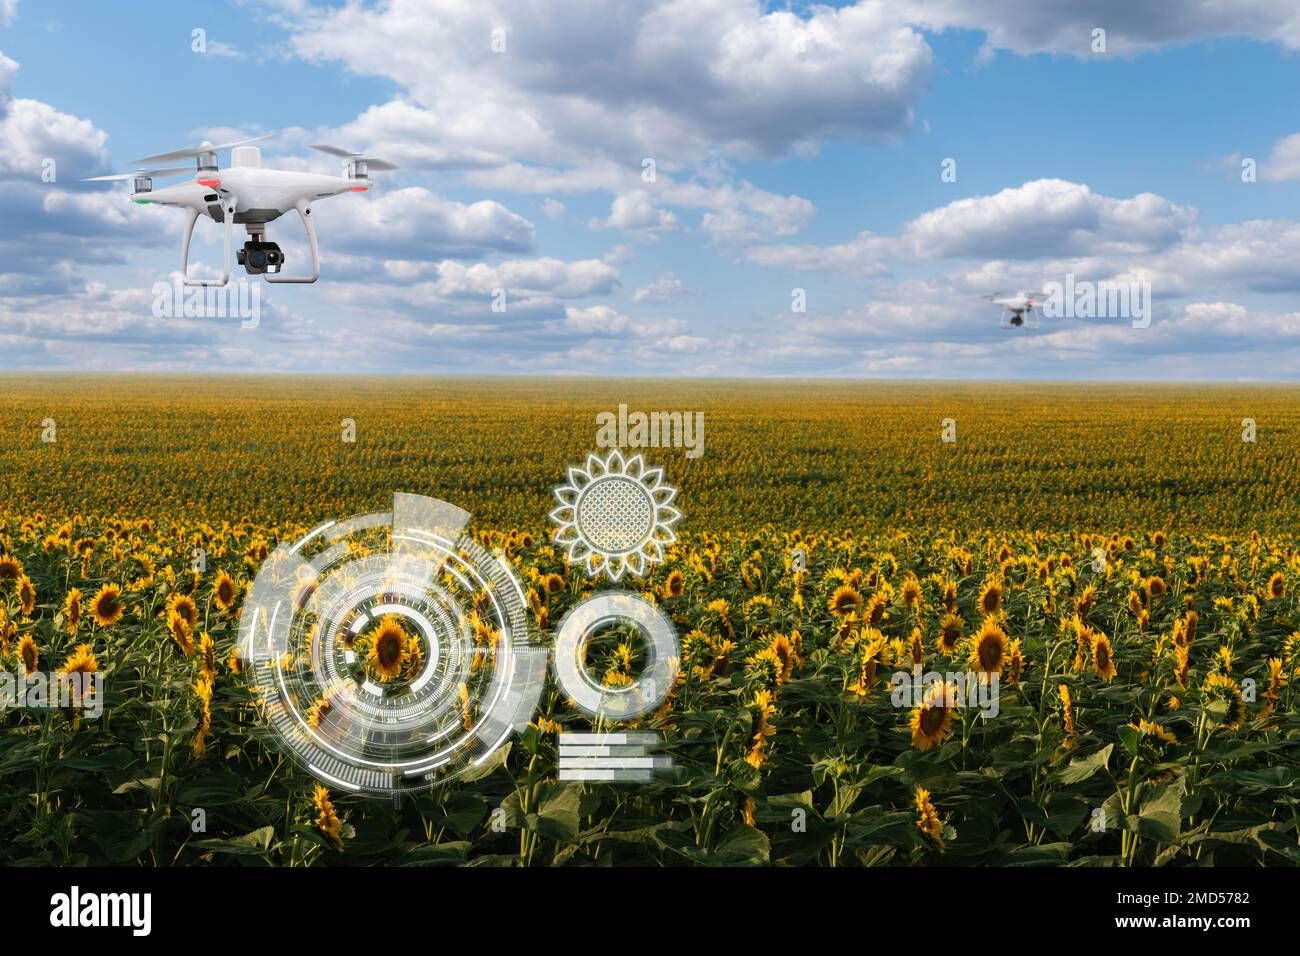 Drone flies over sunflower field and analyzes the ripeness of the crop. Concept of digital transformation in agriculture Stock Photo